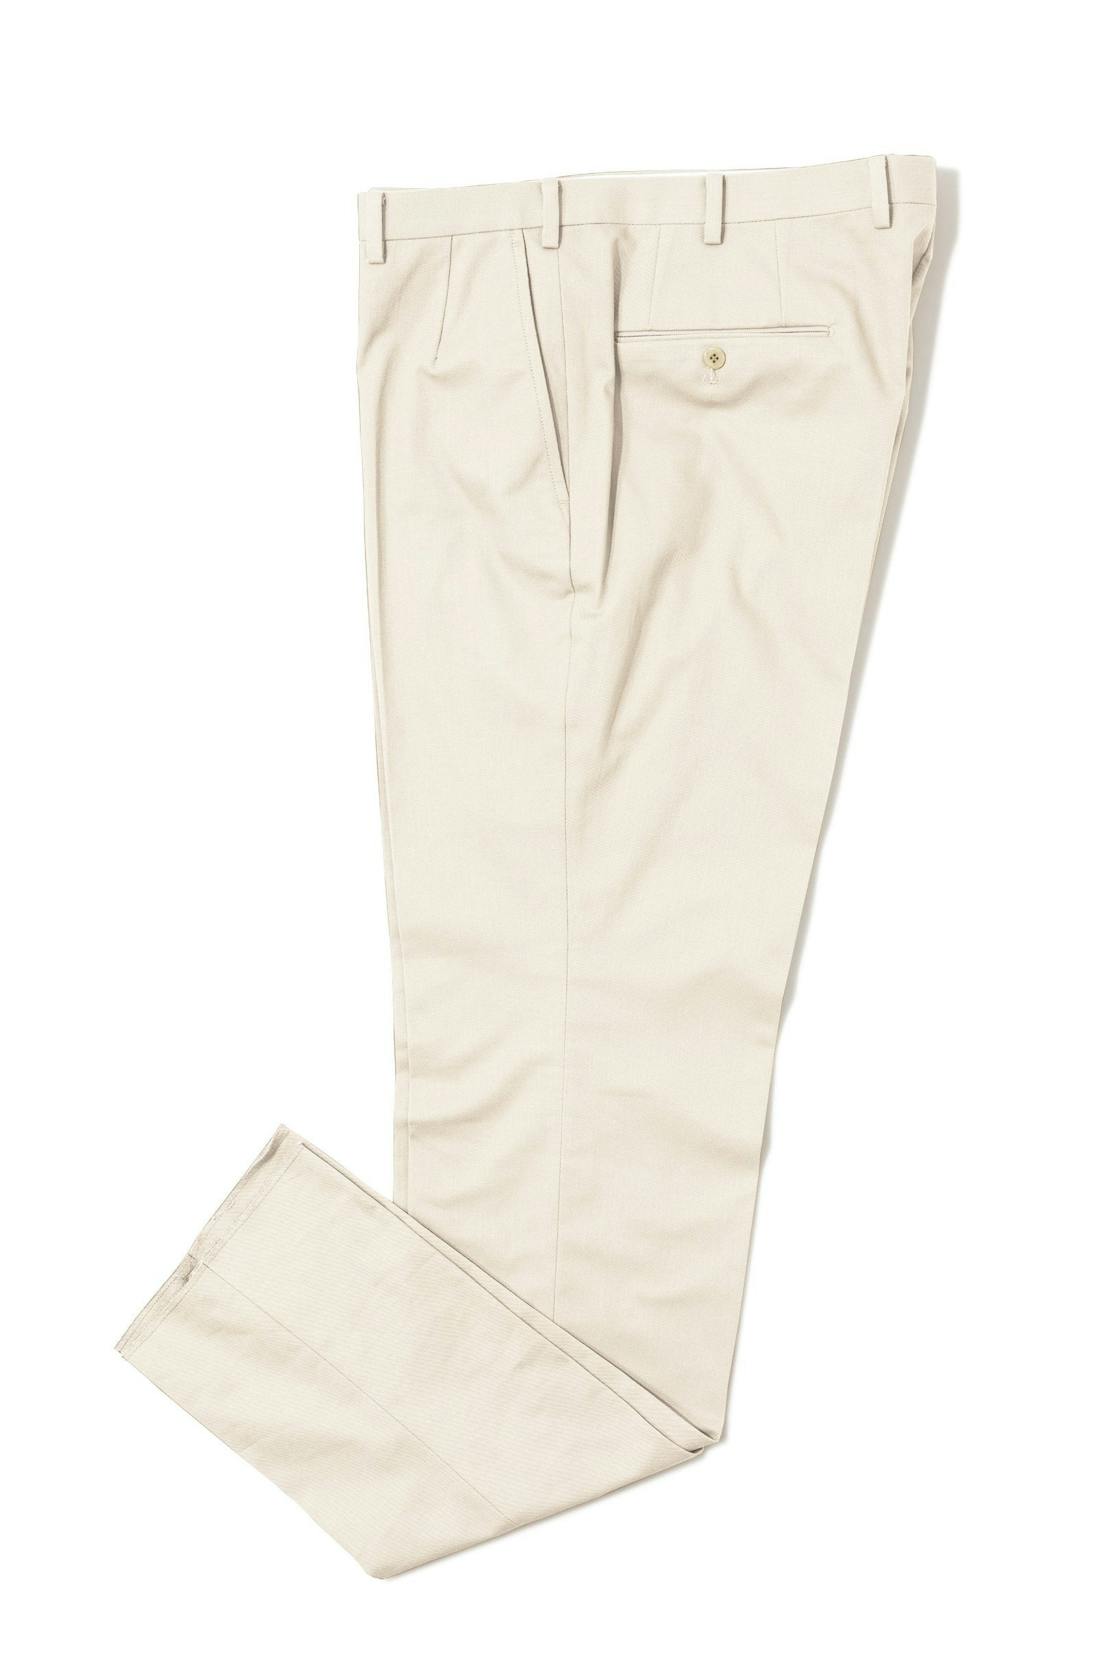 The Armoury by Osaku Stone Cotton Flat-front AO Trousers